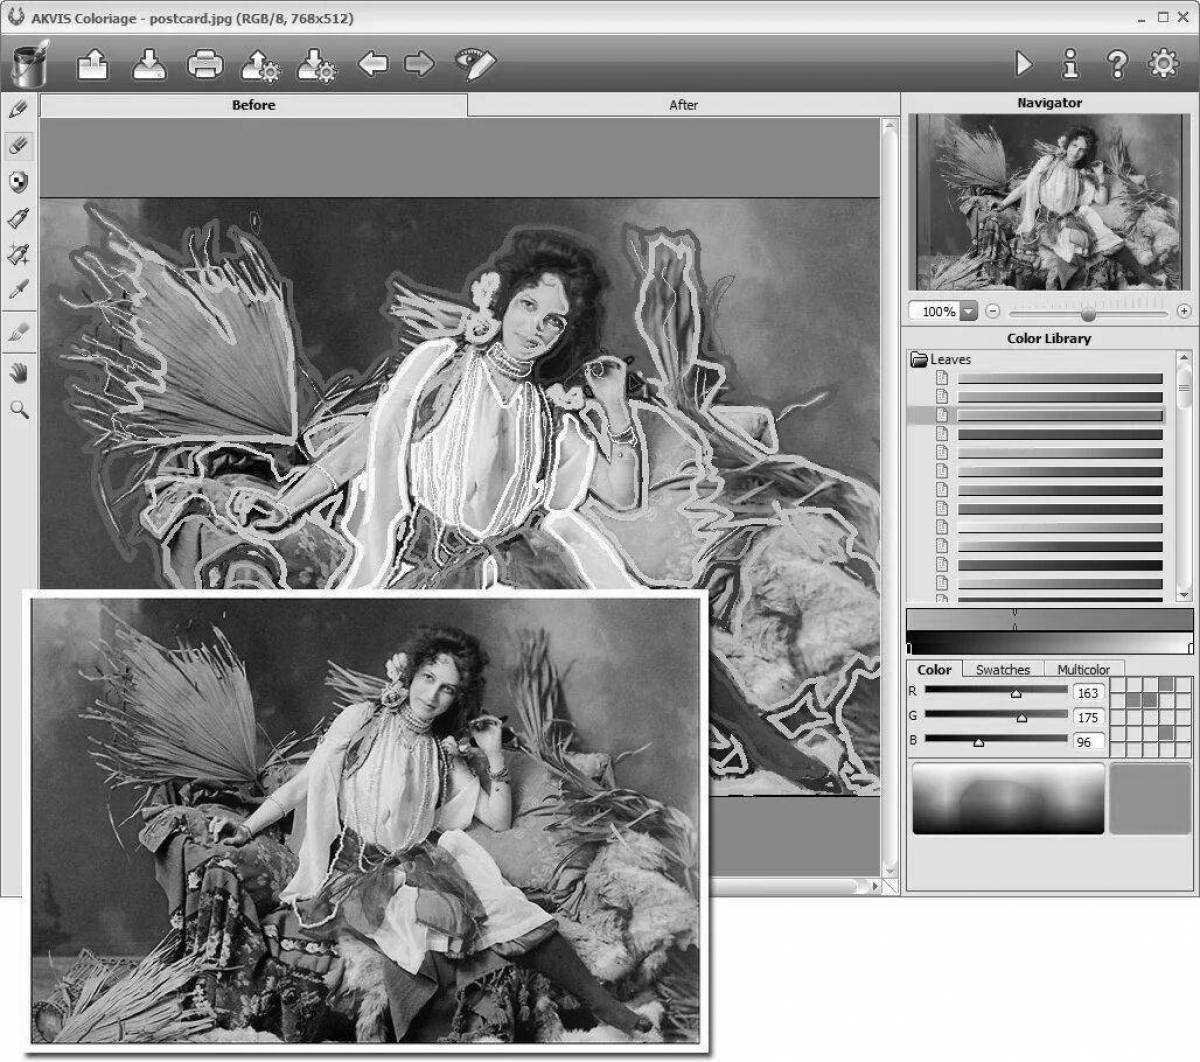 Improved program for colorizing black and white photographs